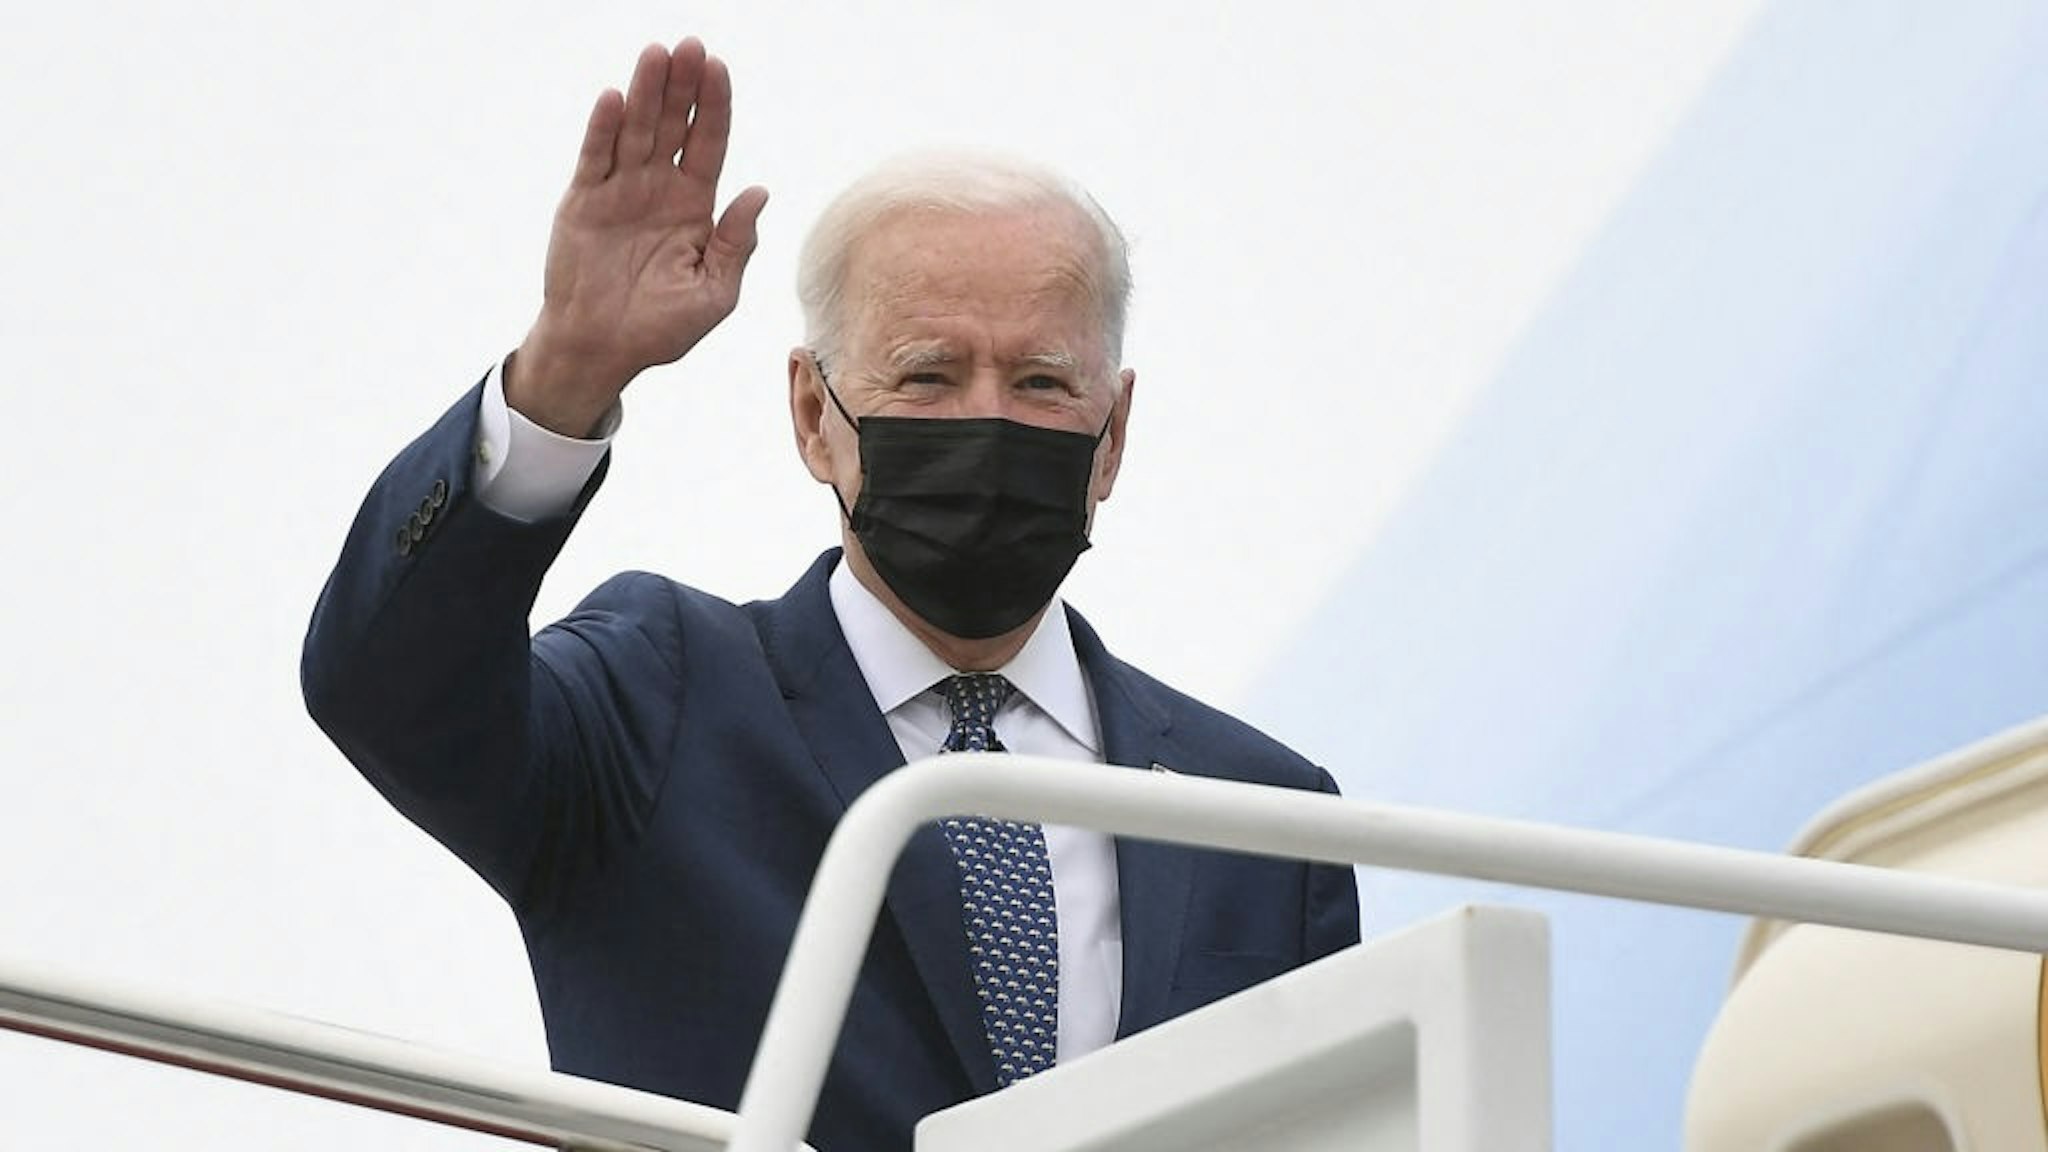 US President Joe Biden waves as he makes his way to board Air Force One before departing from Andrews Air Force Base in Maryland on May 3, 2021. - President Biden is visiting Virginia to promote his Getting America Back on Track Tour. (Photo by MANDEL NGAN / AFP) (Photo by MANDEL NGAN/AFP via Getty Images)